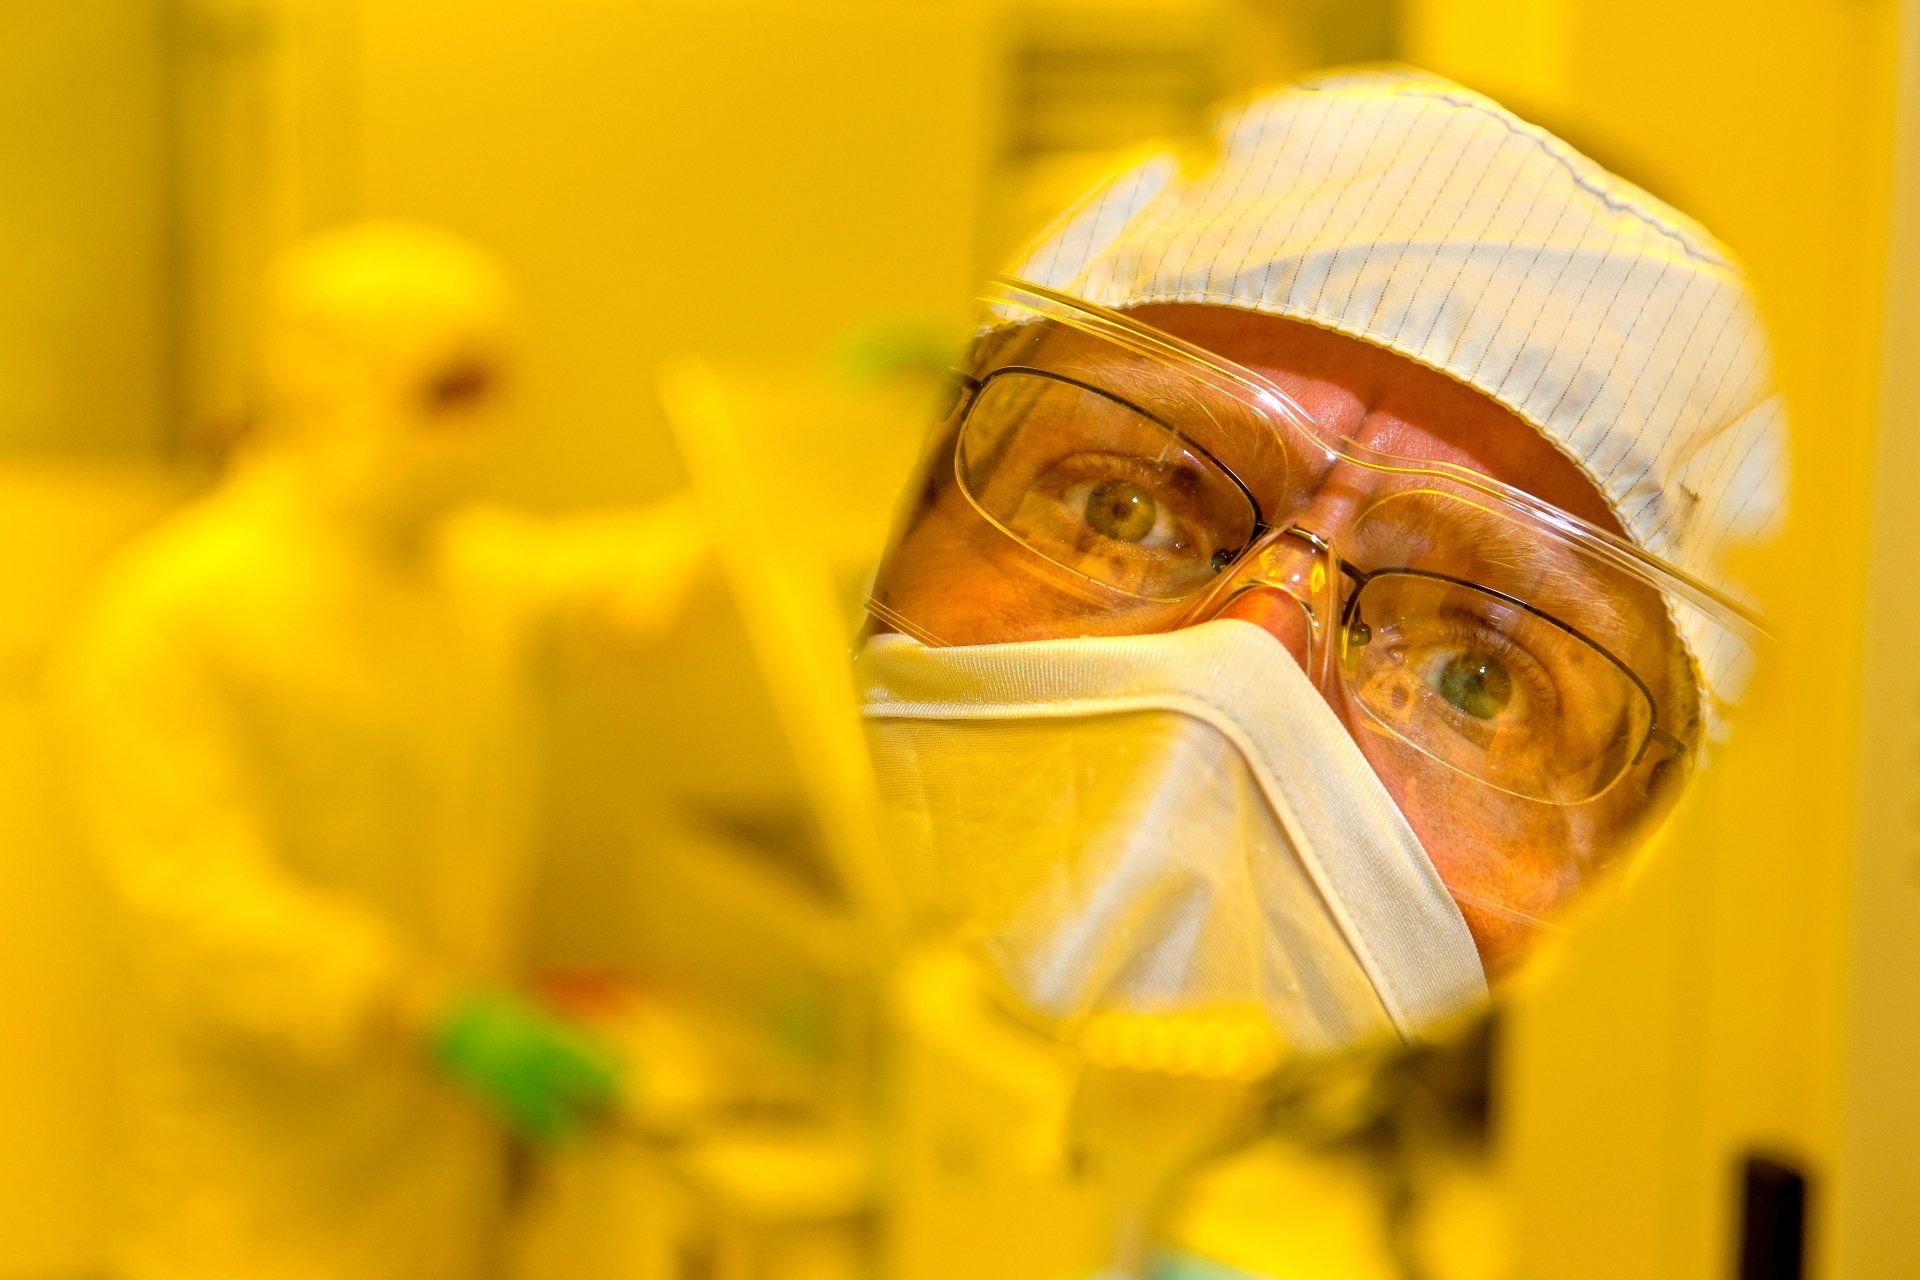 scientist in protective gear and safety glasses at an industrial complex